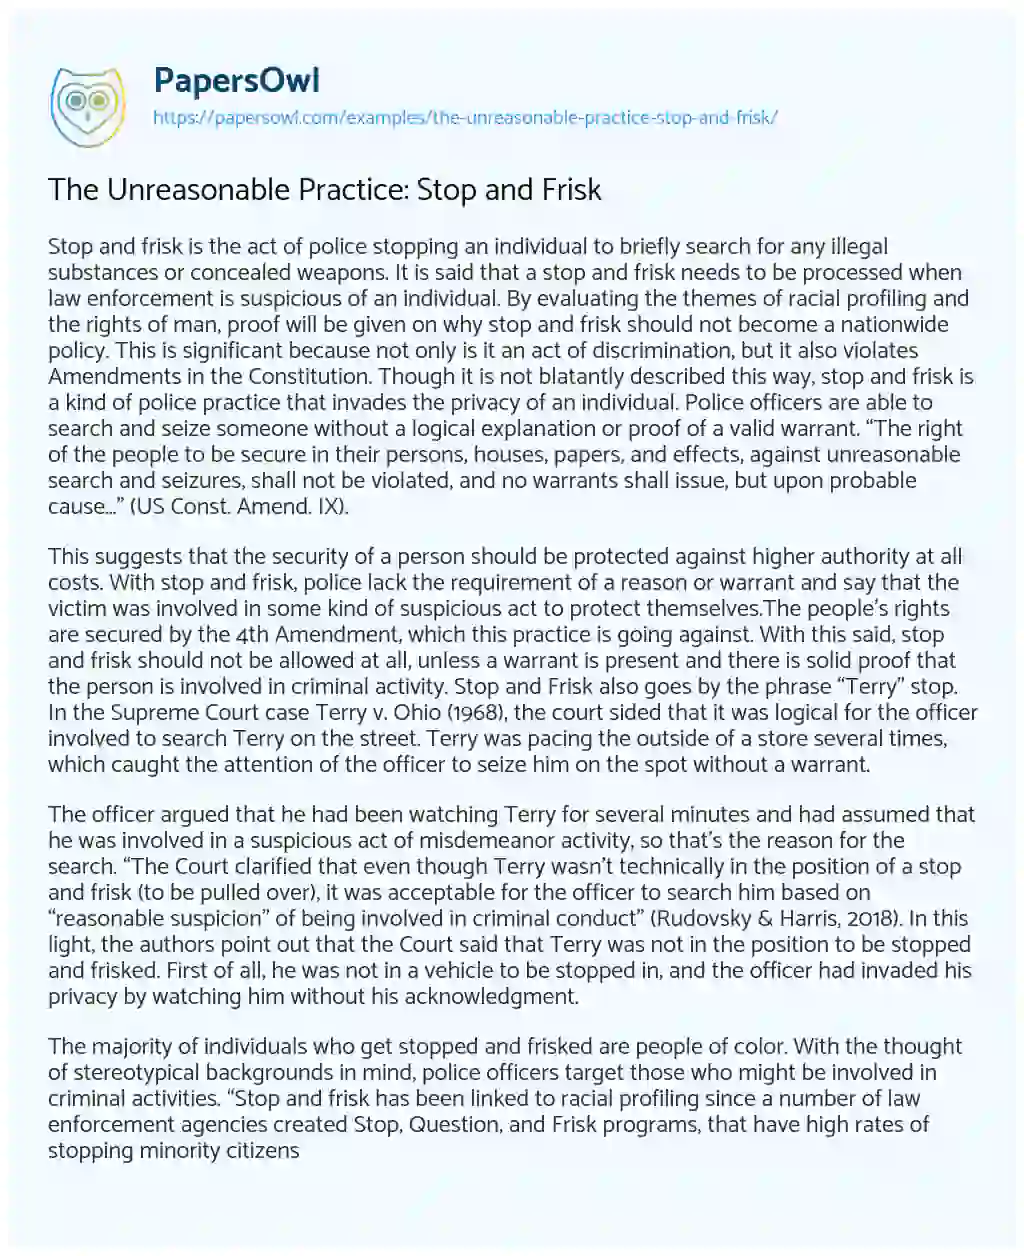 Essay on The Unreasonable Practice: Stop and Frisk